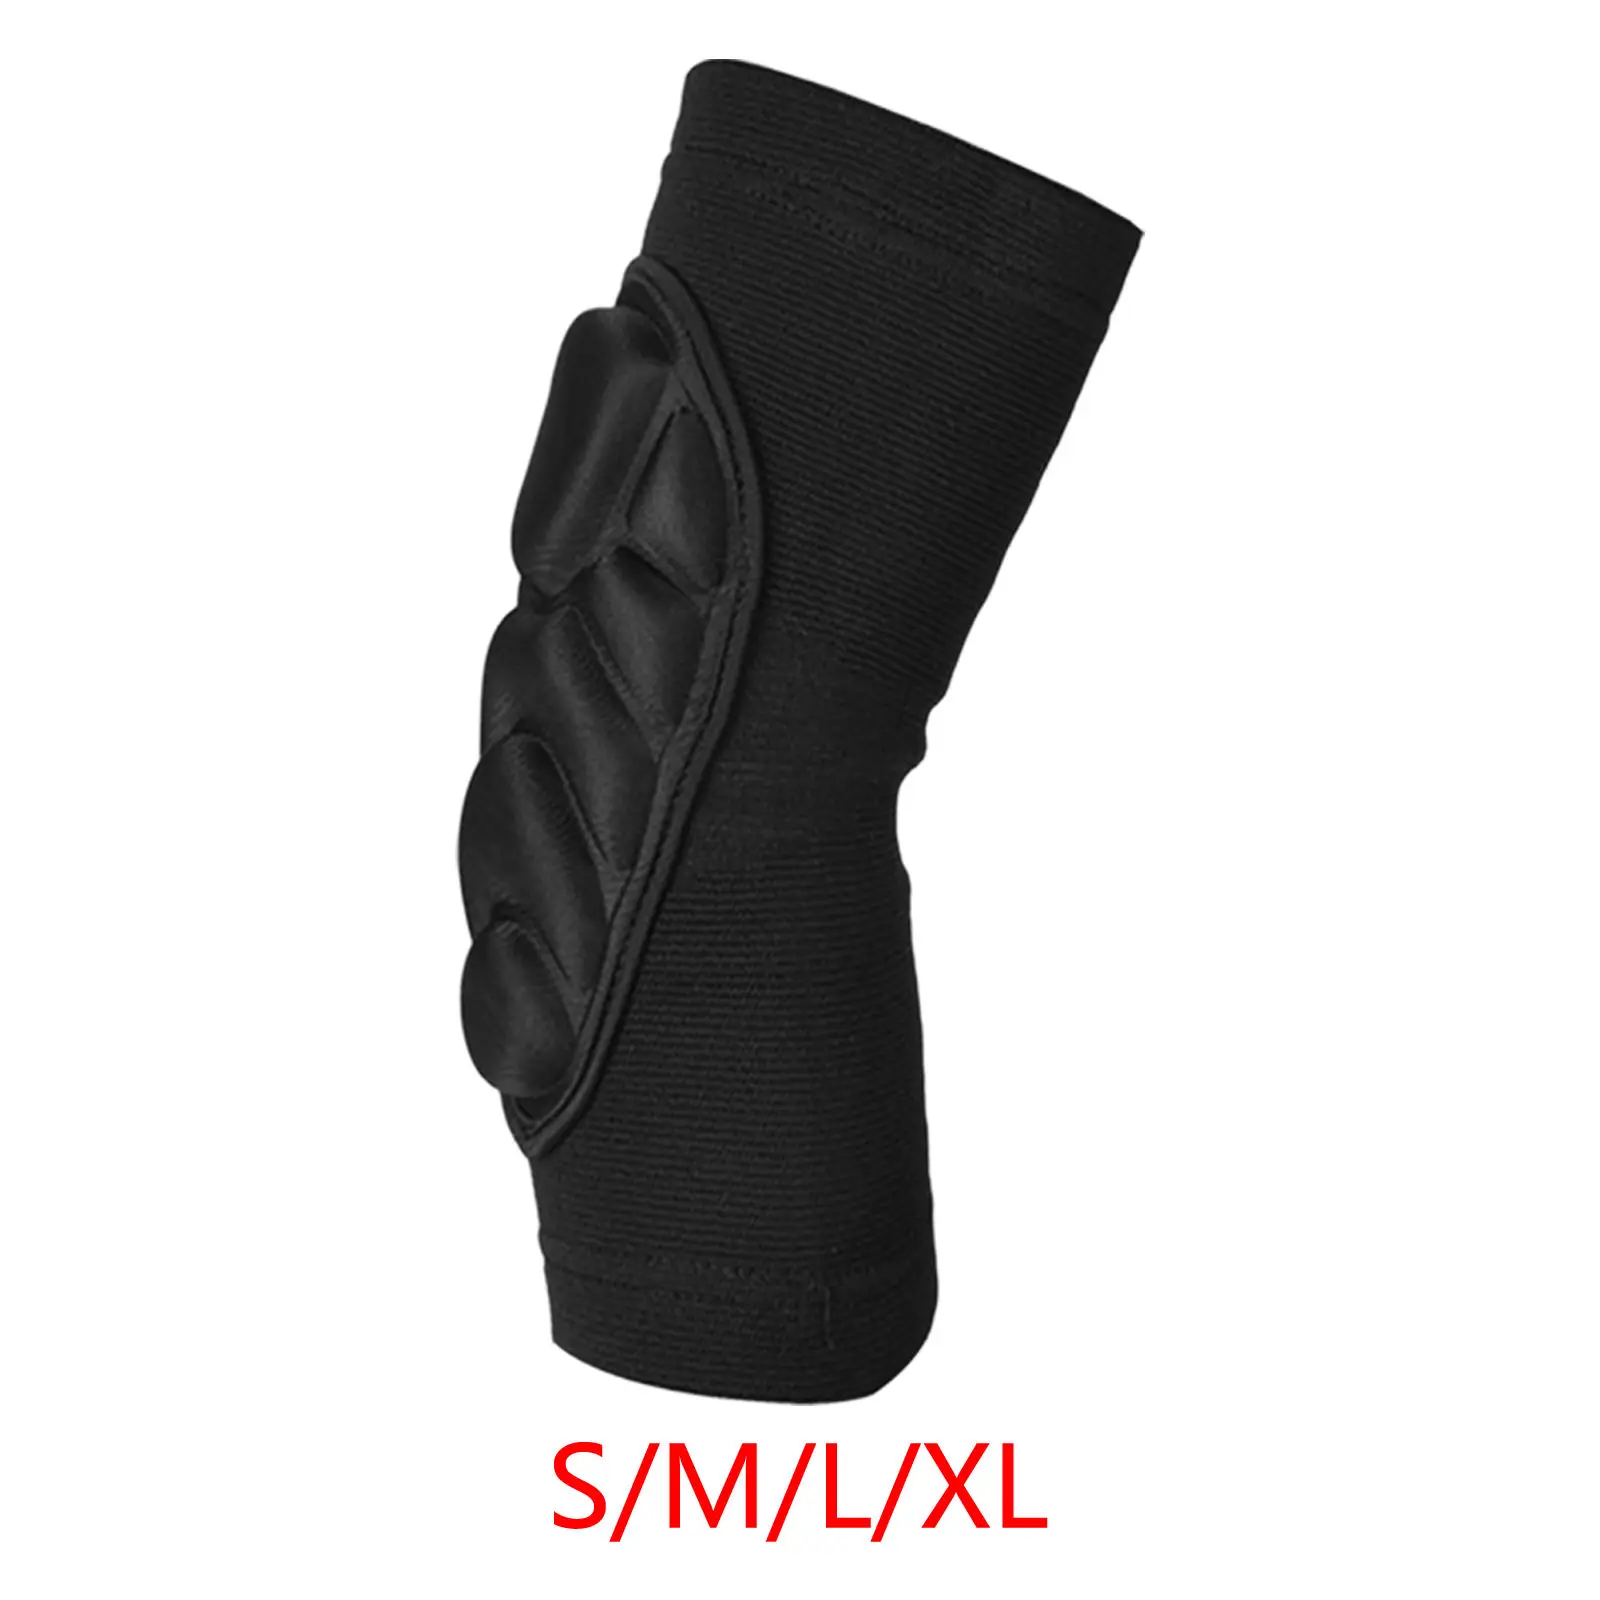 Elbow / Knee Pads Multipurpose Compression Padding for Arm Leg Protection Active Wear for Basketball, Football, Tennis